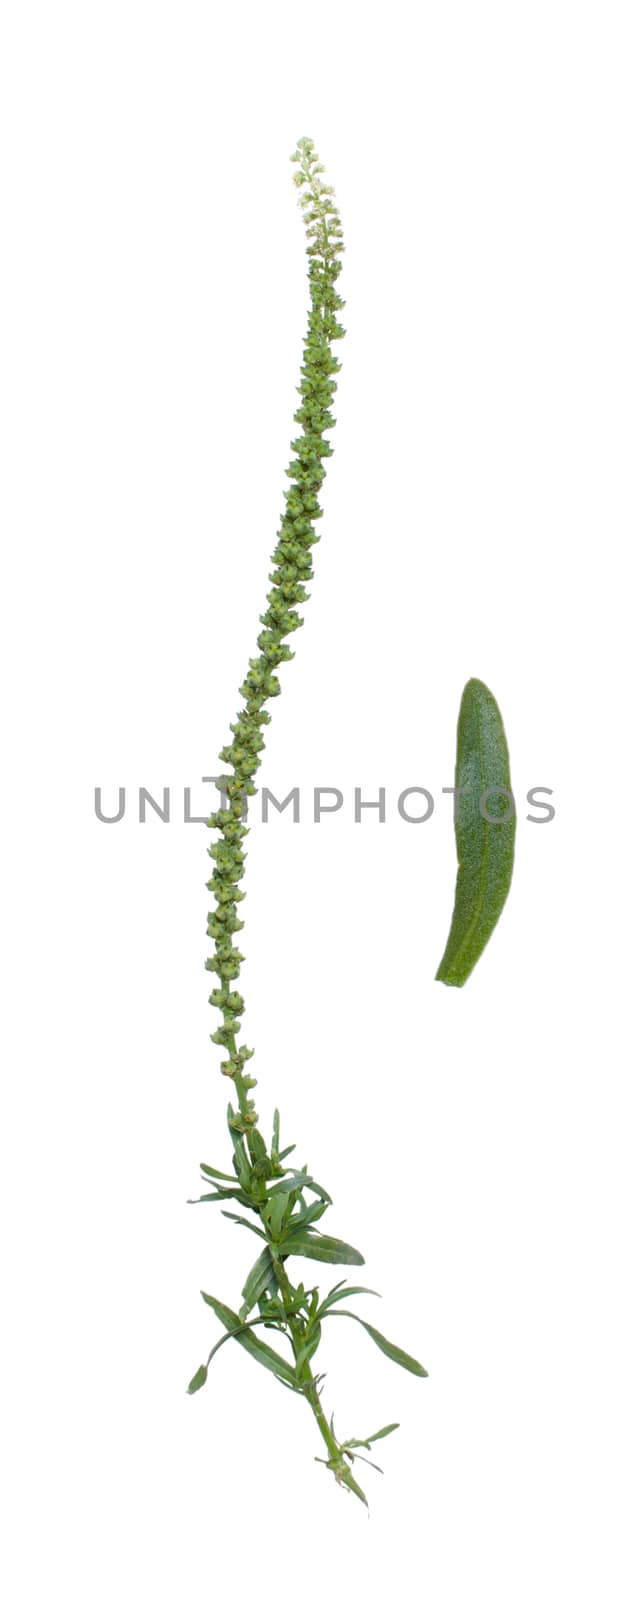 Flower with small blooms isolated on white background.